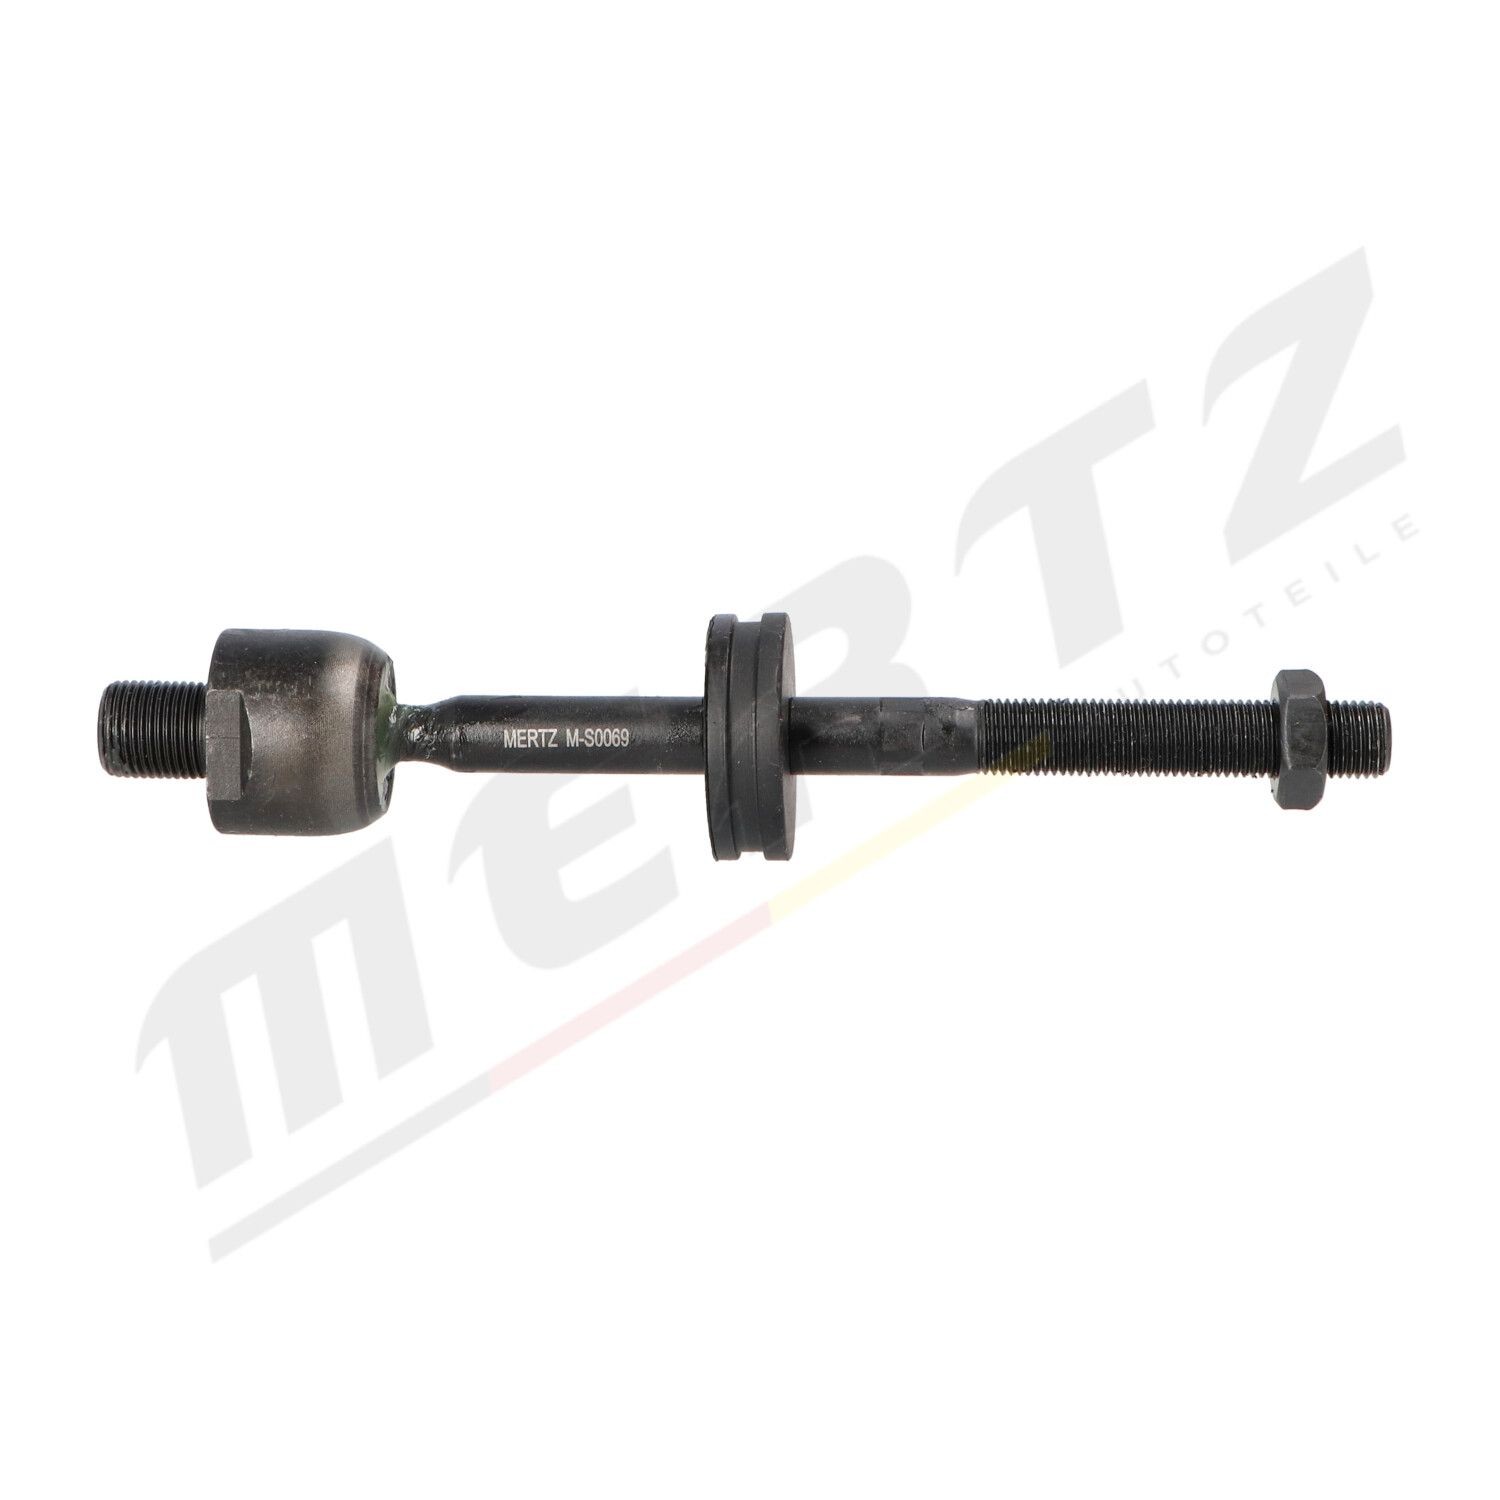 M-S0069 MERTZ Inner track rod end BMW Front Axle Left, Front Axle Right, M18x1,5, 226 mm, 206 mm, with nut